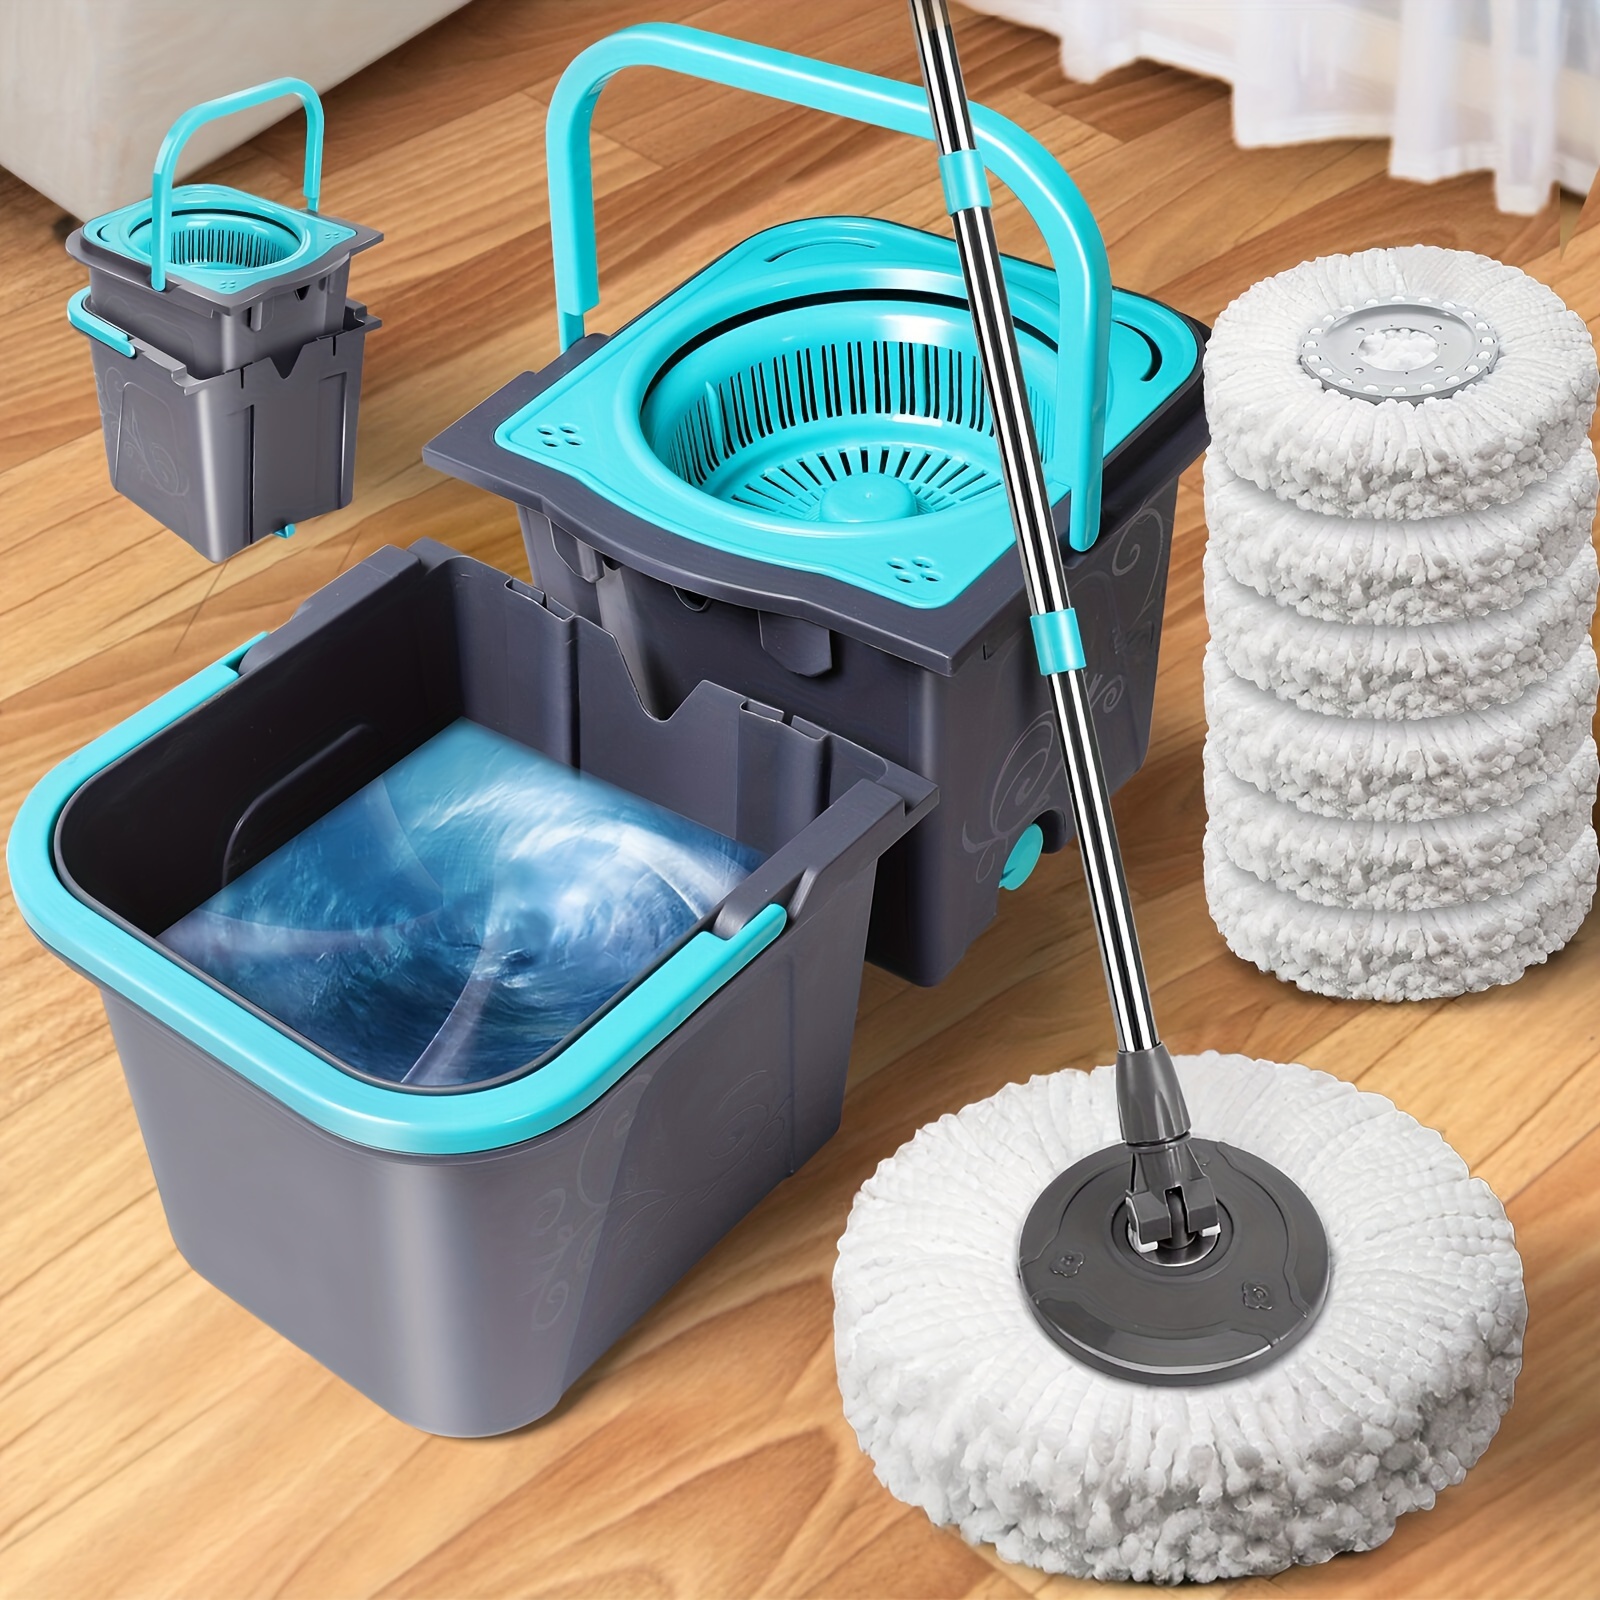 

Mastertop Spin Mop And Bucket Set, Stackable Microfiber Floor Cleaning System, Wet & Dry Mop With 6 Replacement Refills For Hardwood, Laminate, Tile